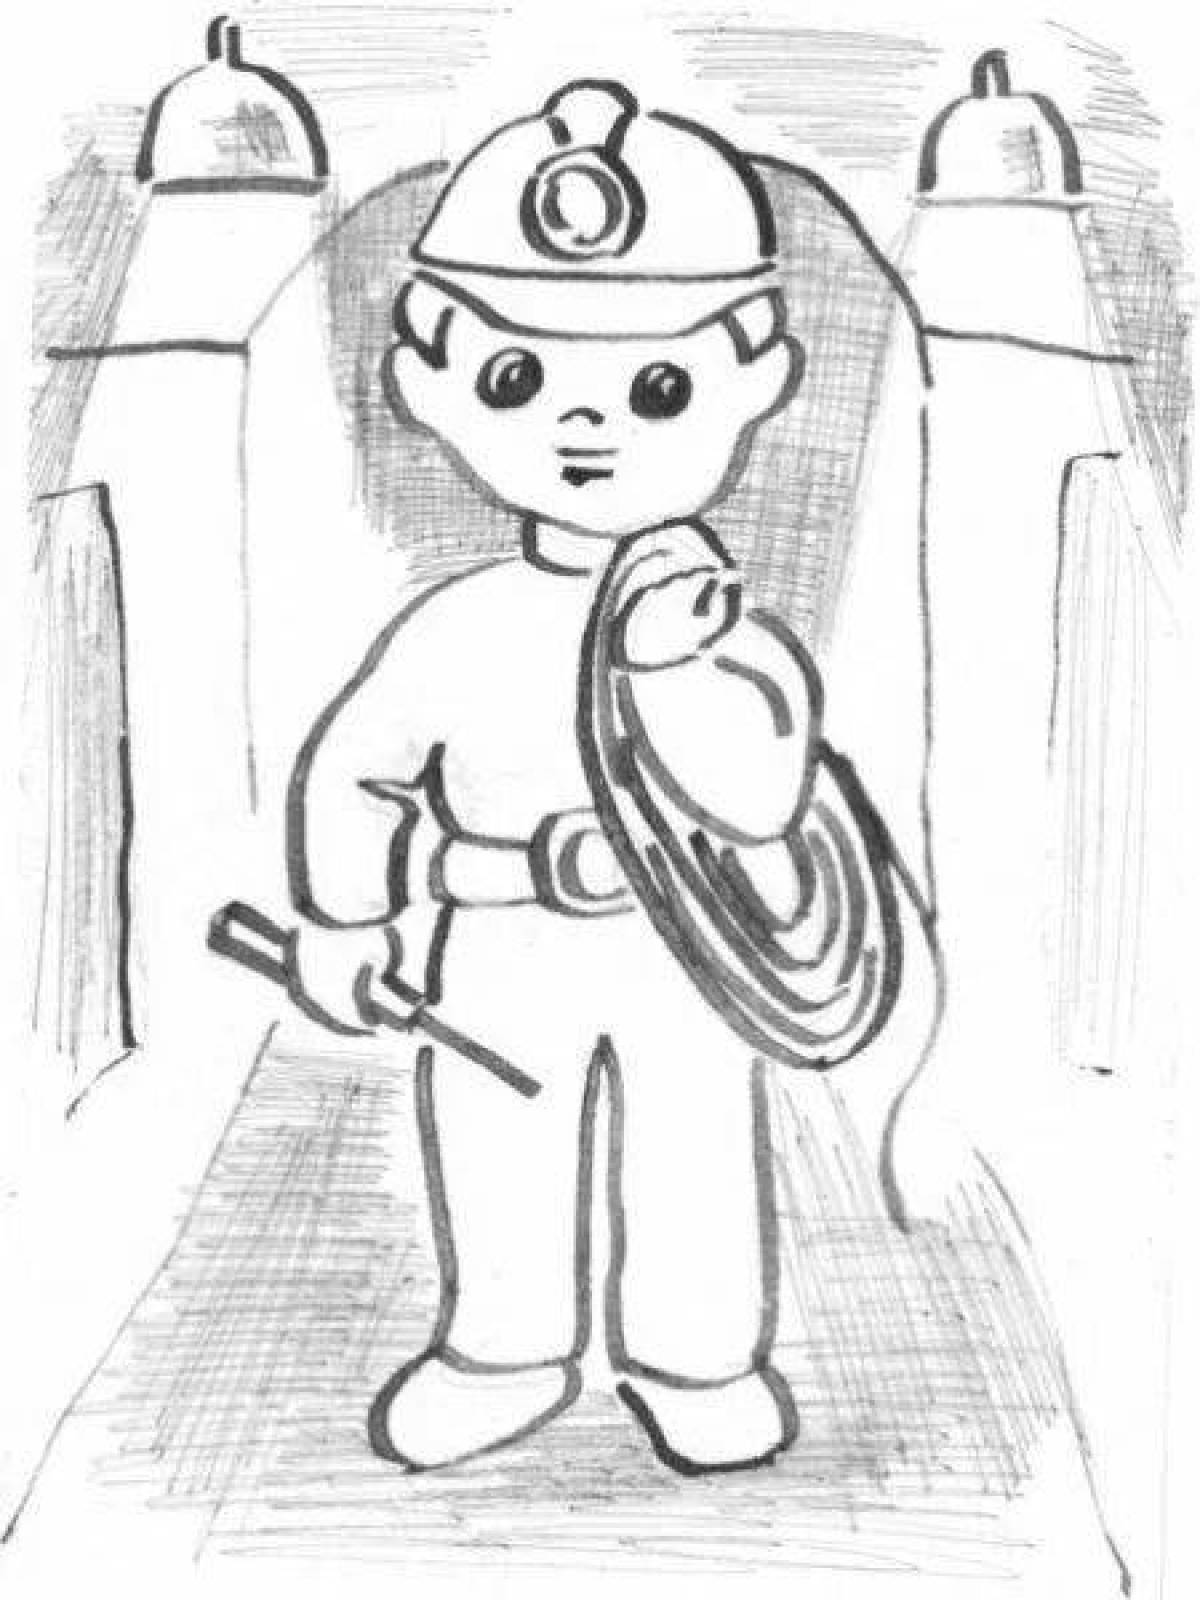 Intriguing miner coloring book